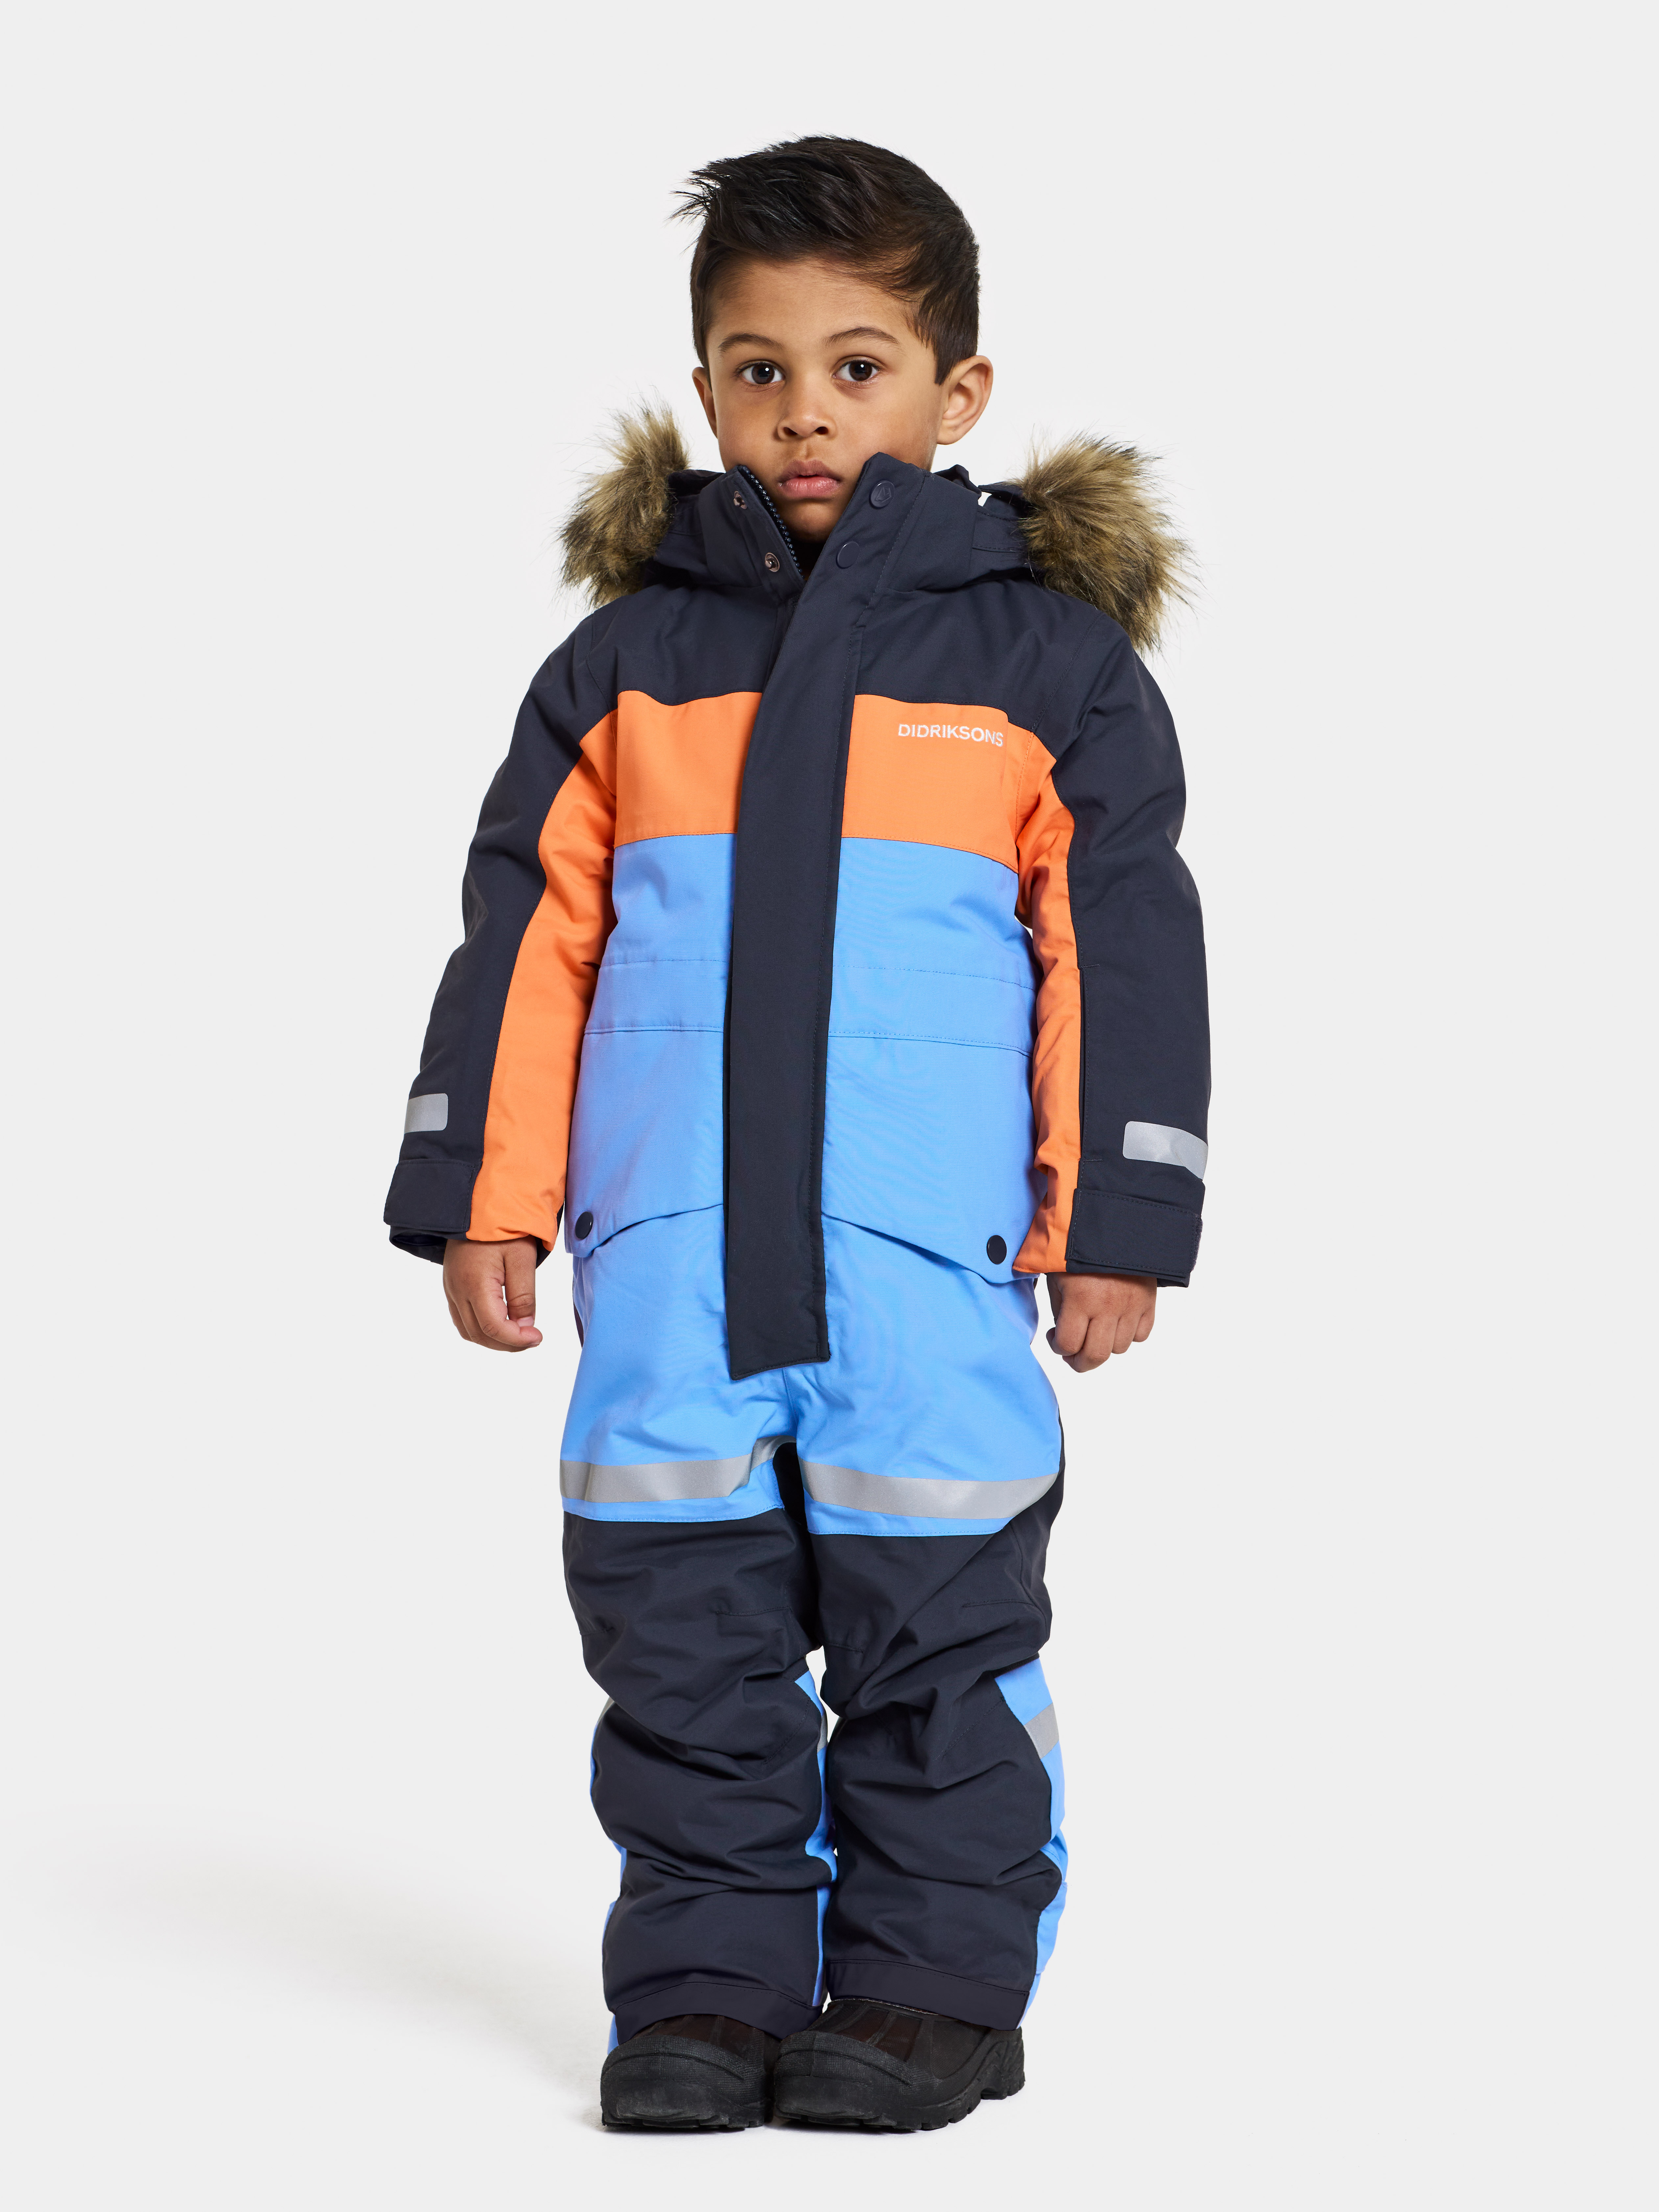 bjarven_kids_coverall_504579_509_10front2_m222.jpg